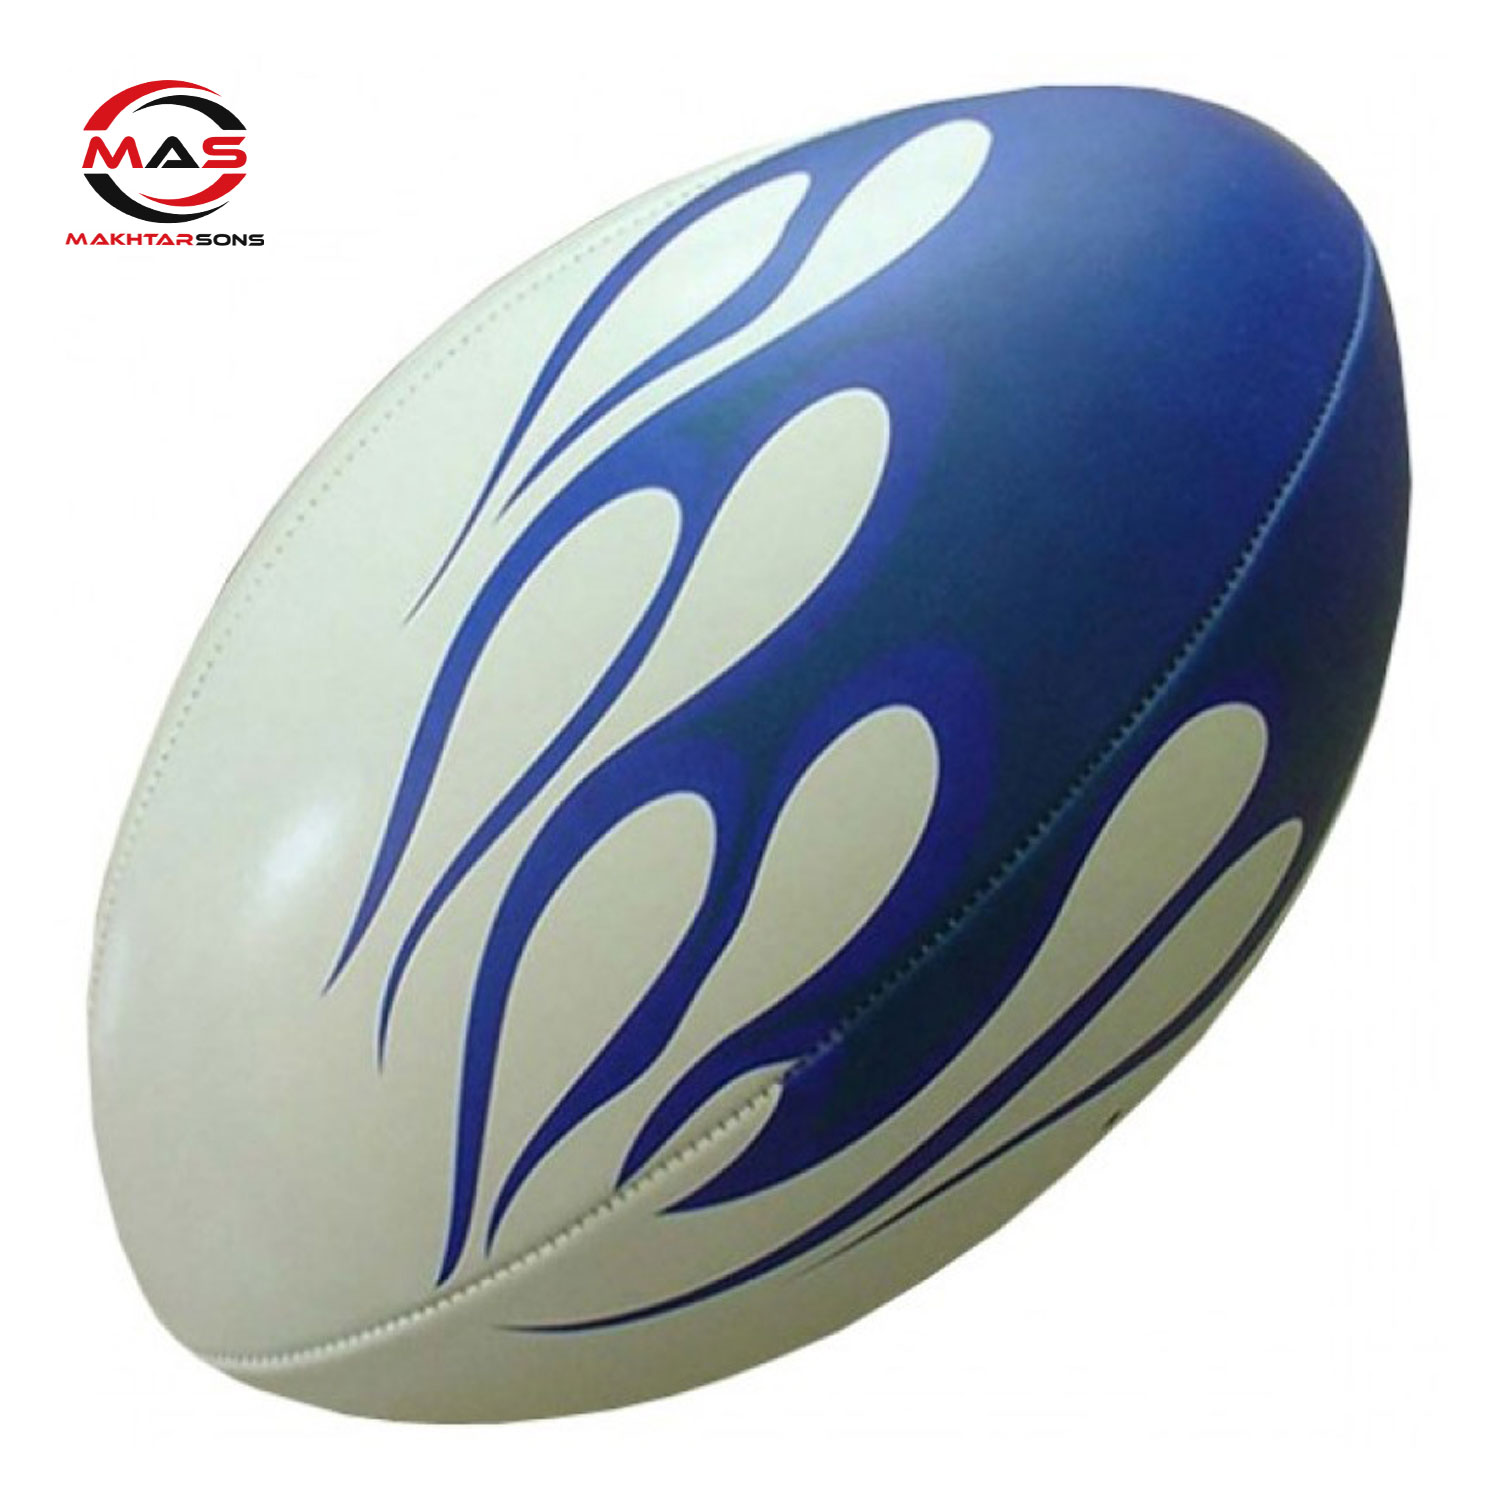 RUGBY BALL | MAS 432